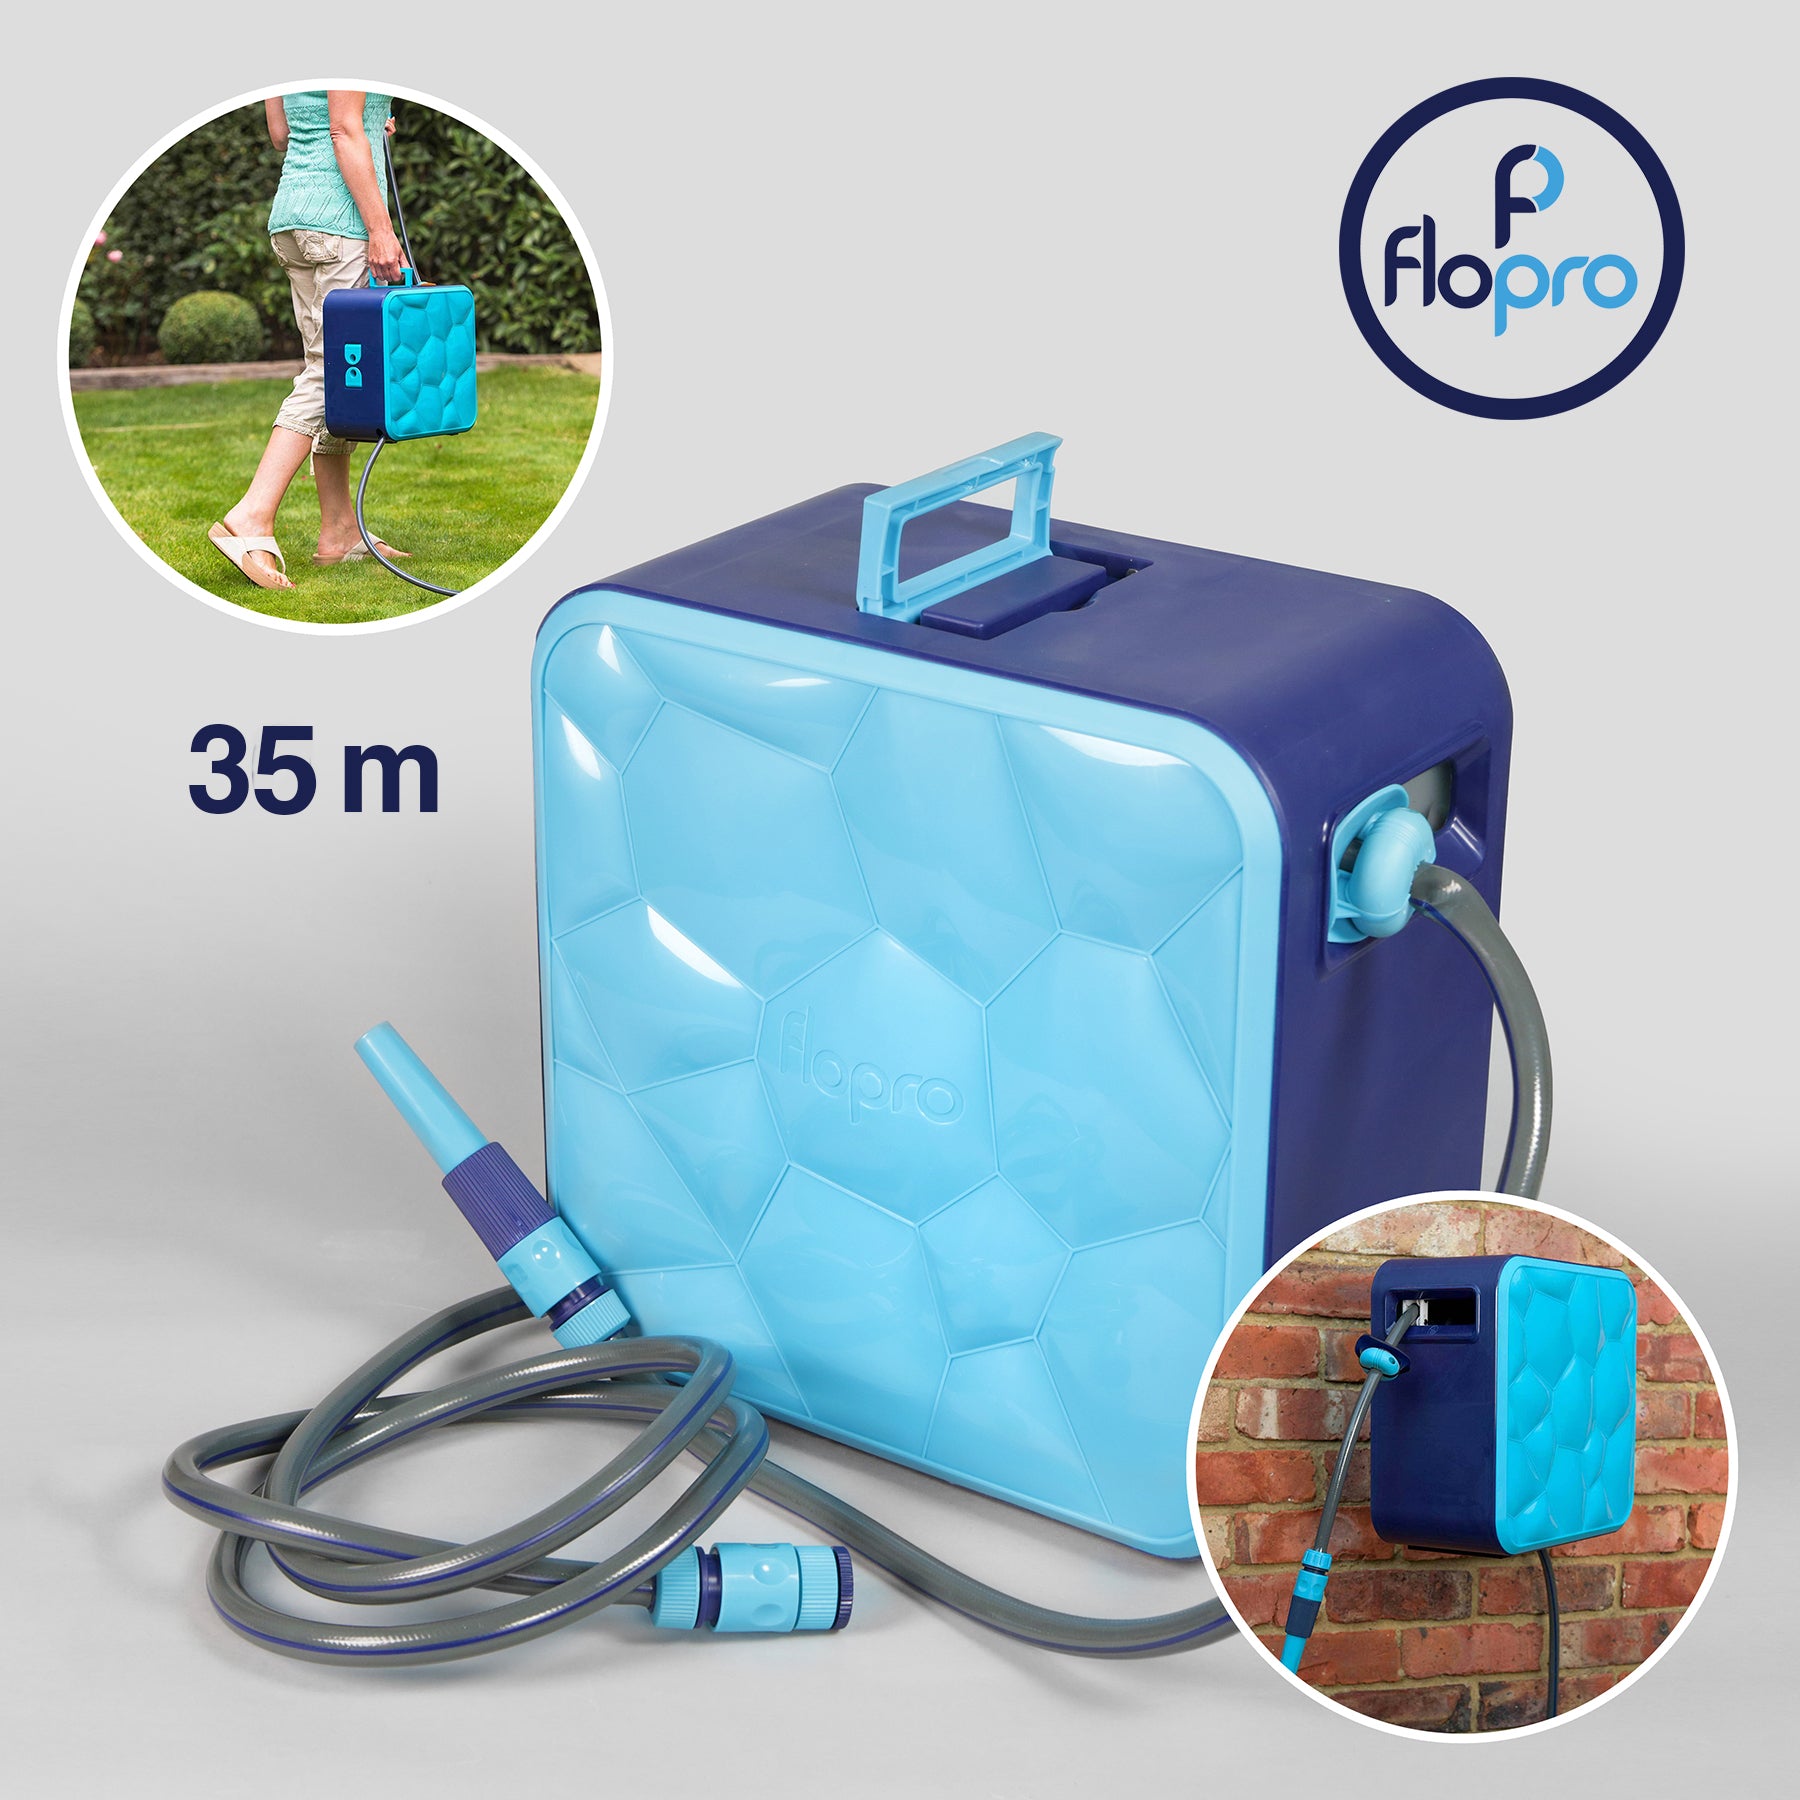 35M Cube Auto Retract Hose Reel by Flopro, sold by In-Excess